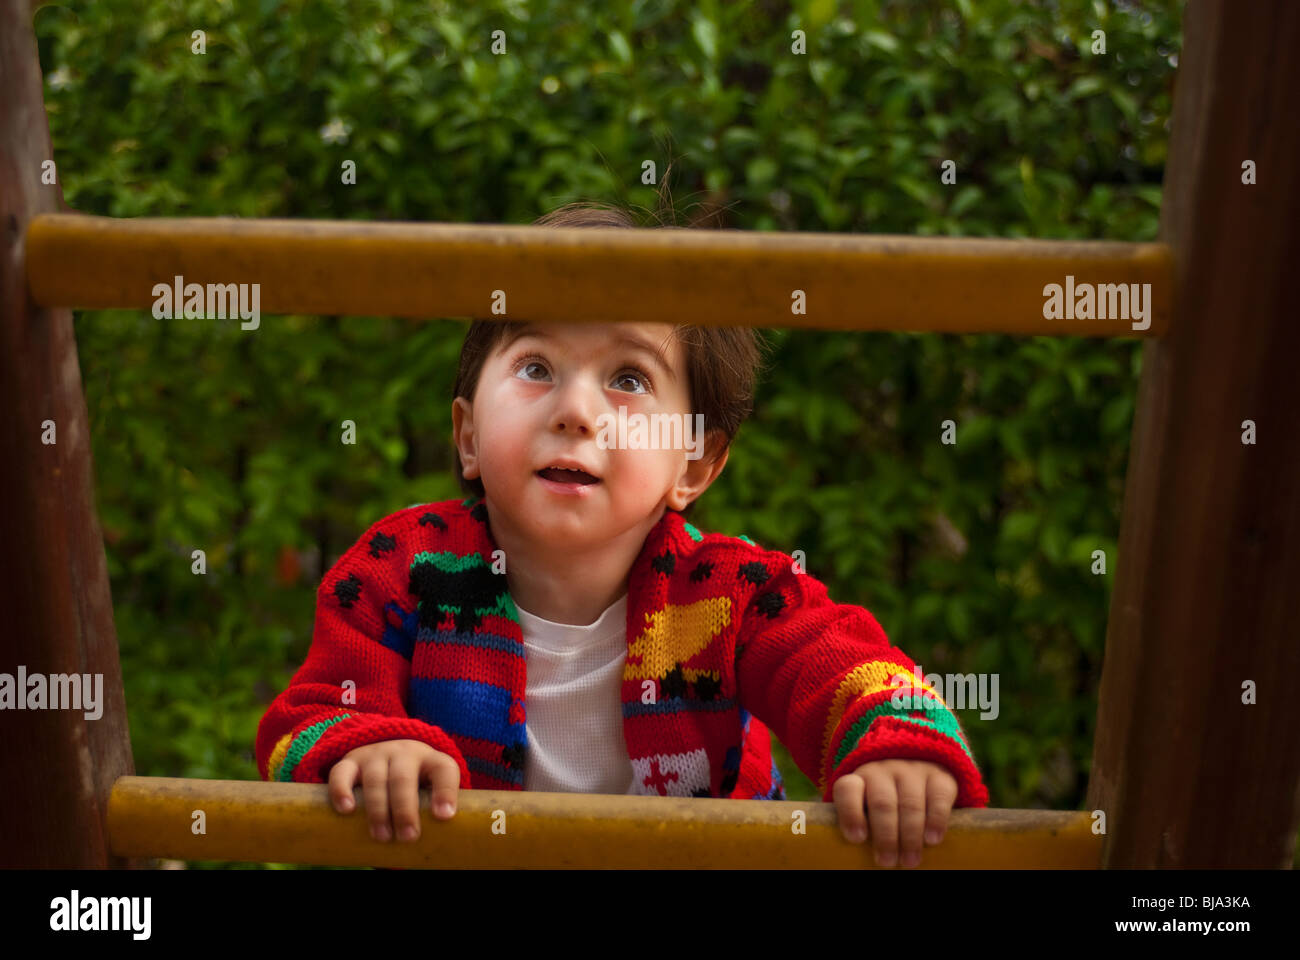 young boy climbing a ladder looking ahead Stock Photo